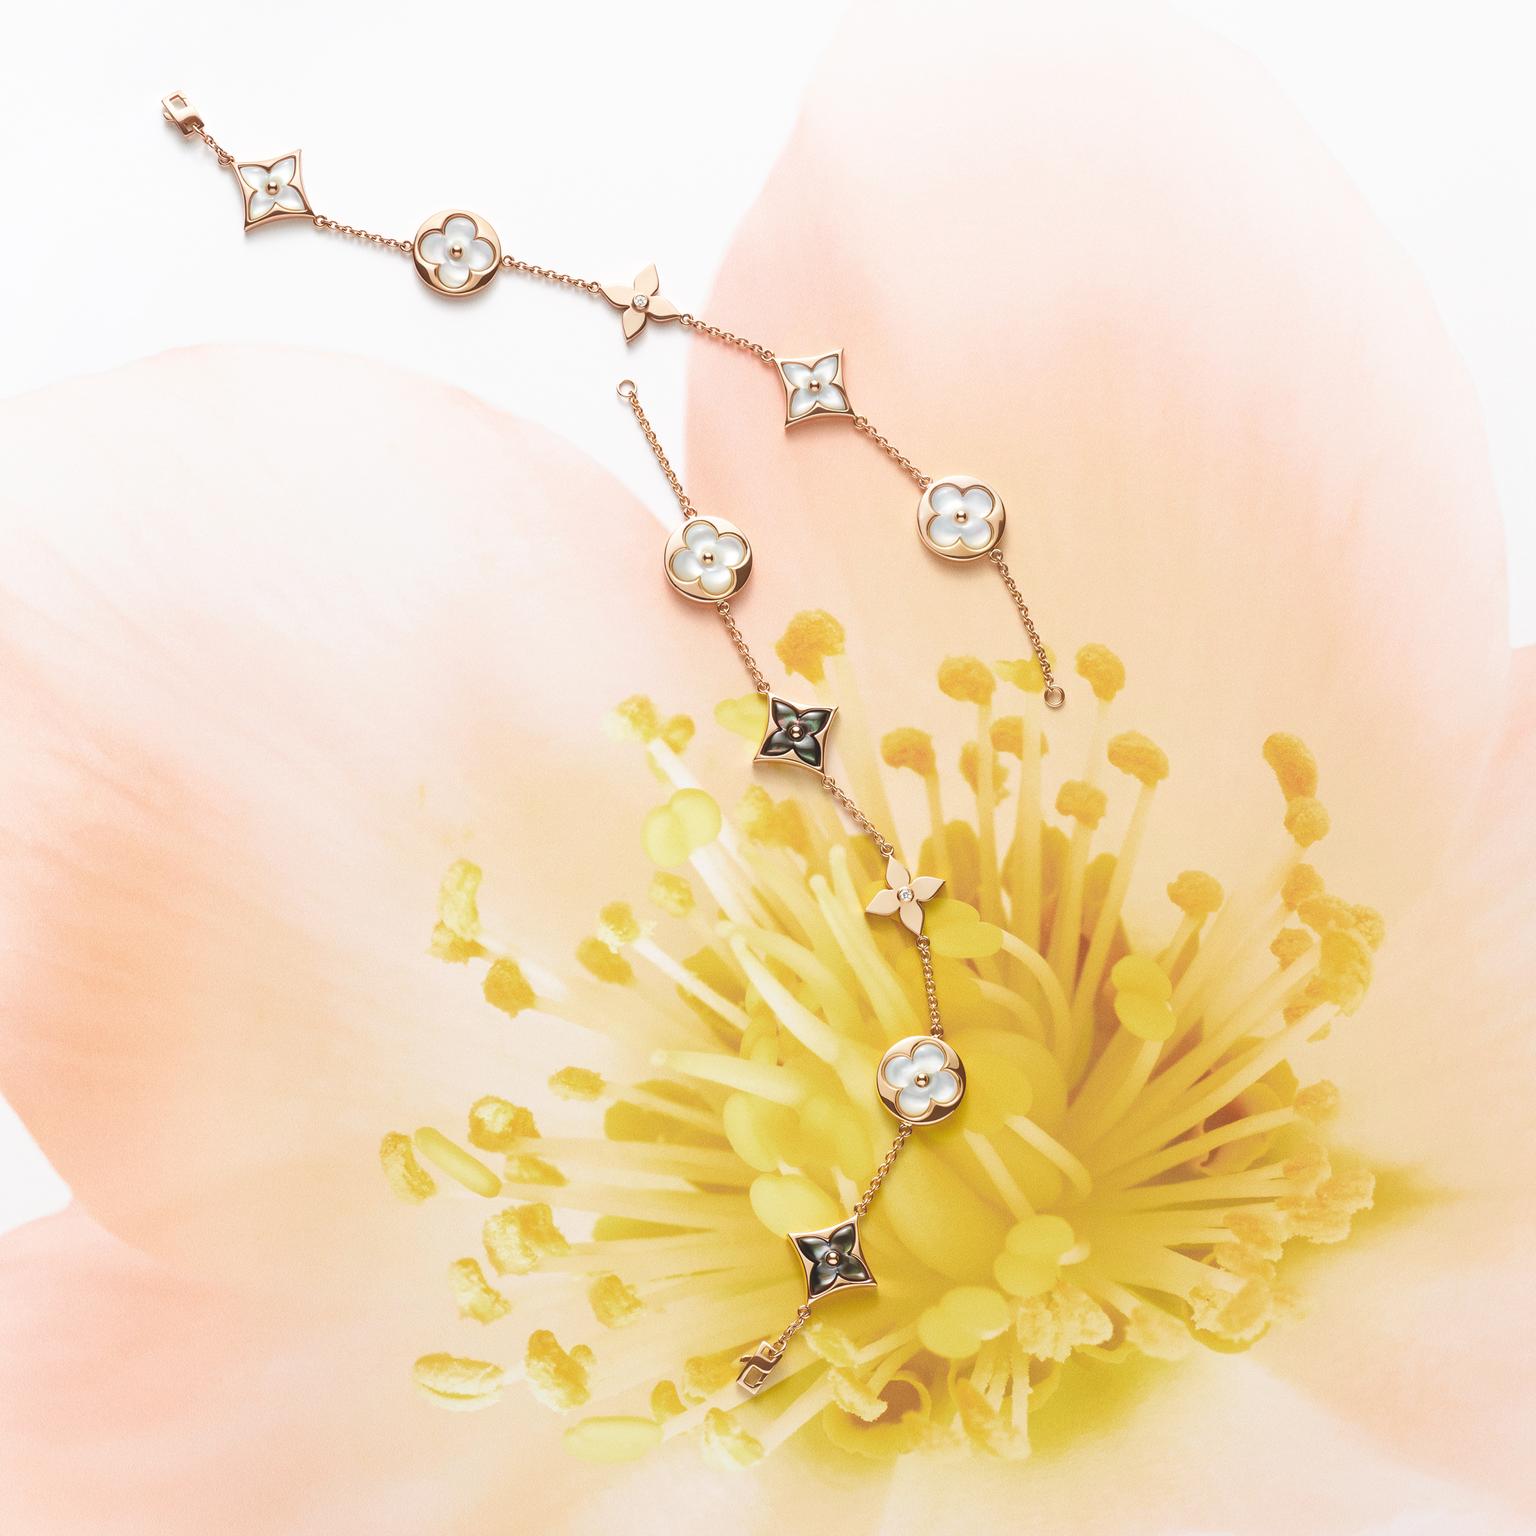 Blossom mother-of-pearl bracelet, Louis Vuitton